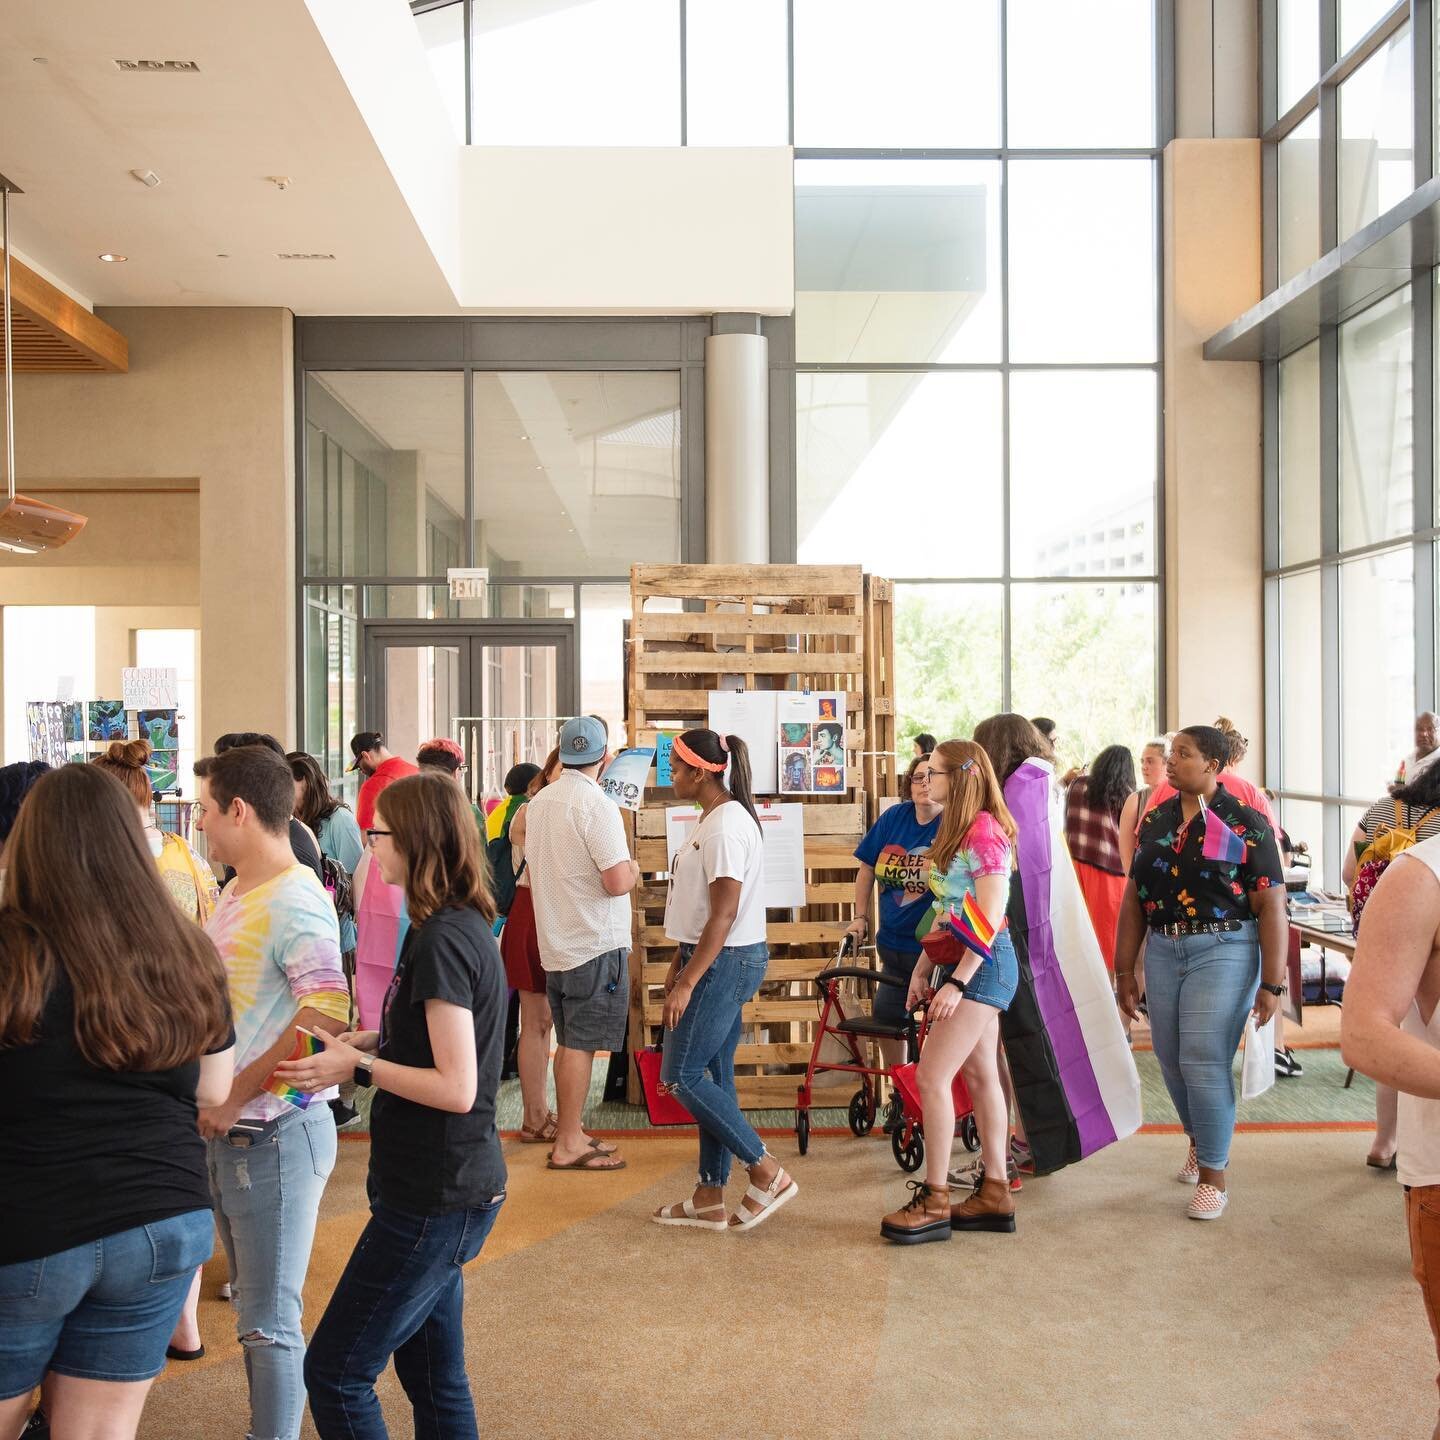 Don&rsquo;t forget to register for our upcoming arts market pop-up, The Queerative Market: An Arts Market for Southern Queer Creatives held on Saturday, June 27, 2020 at the raising Cane&lsquo;s River Center downtown Baton Rouge. Registration link is